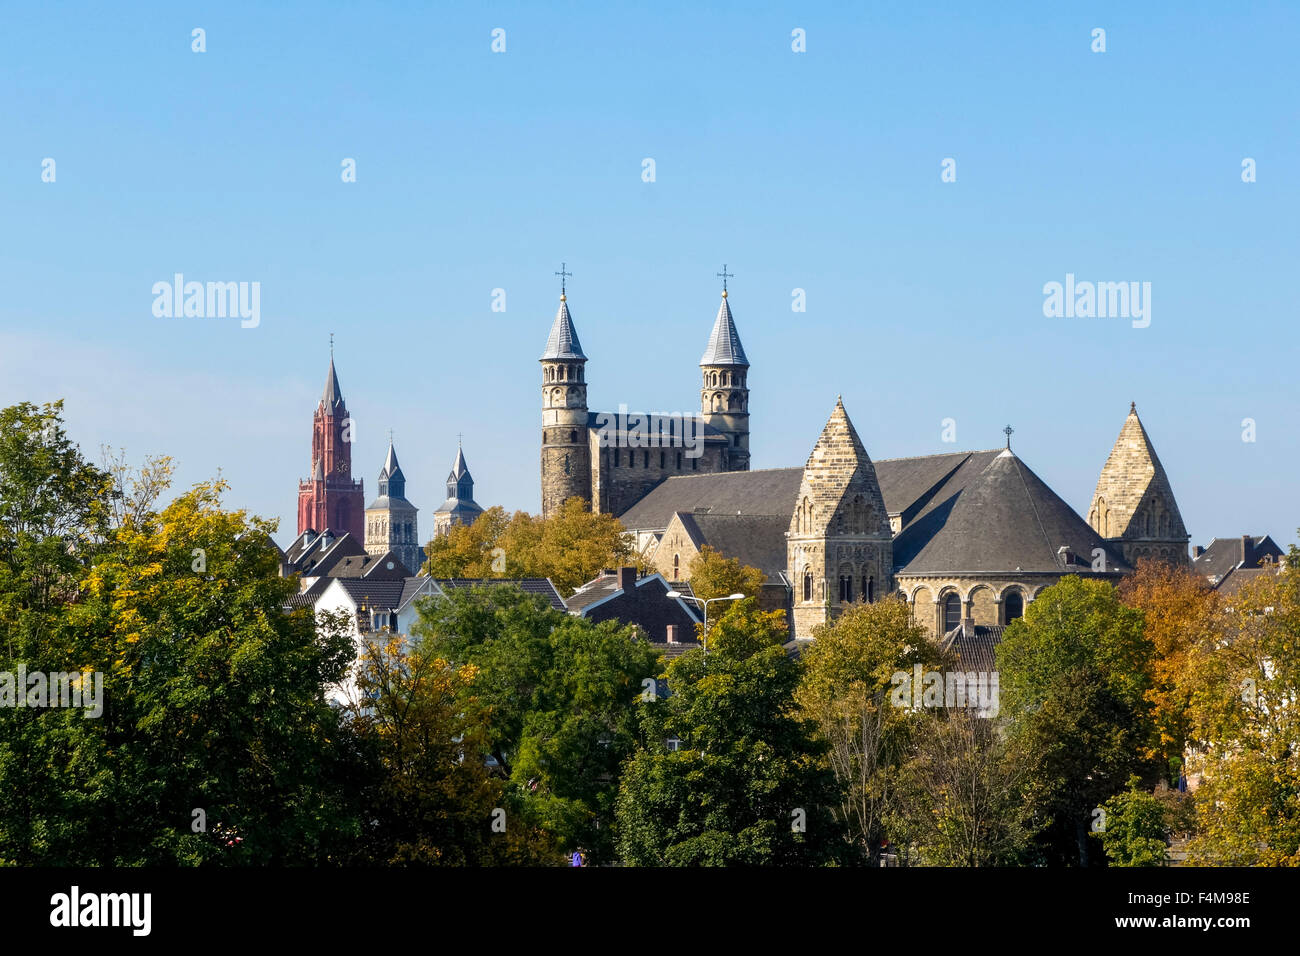 View towards Basilica of Our Lady, with Basilica of Saint Servatius and St. John's church, Maastricht, Limburg, Netherlands. Stock Photo